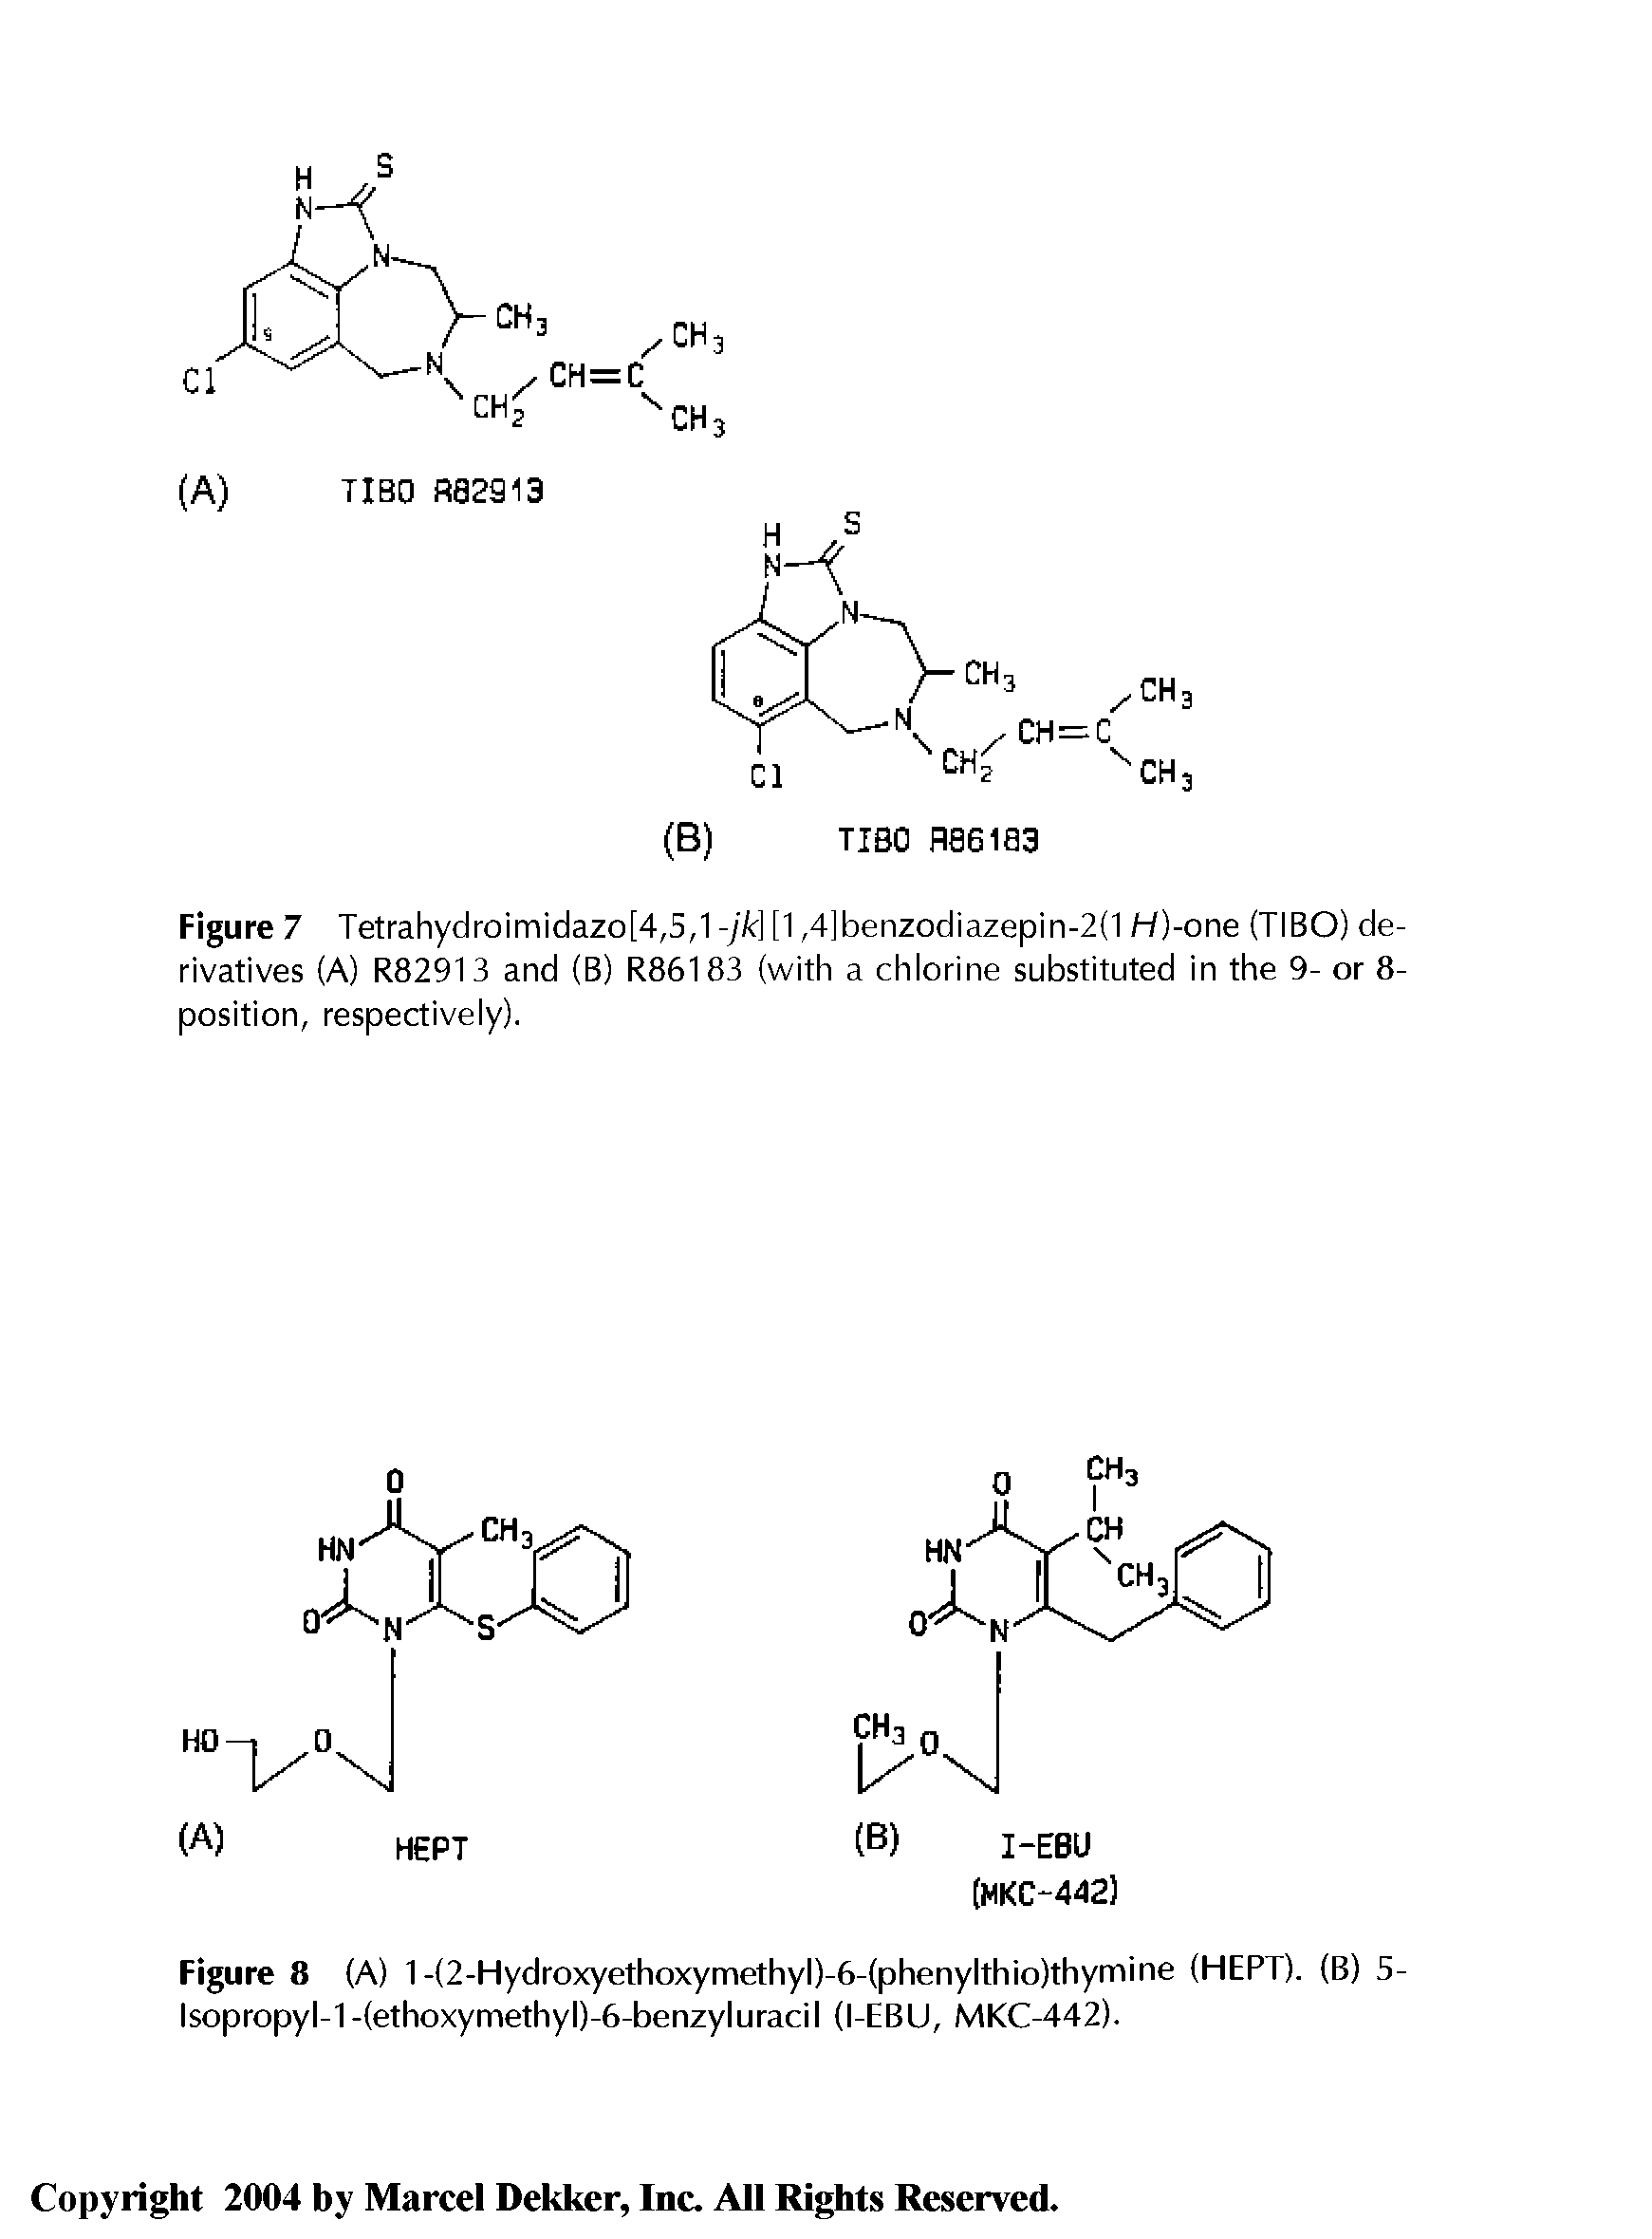 Figure 7 Tetrahydroimidazo[4,S,1 -jk] [1,4]benzodiazepin-2(1 H)-one (TIBO) derivatives (A) R82913 and (B) R86183 (with a chlorine substituted in the 9- or 8-position, respectively).